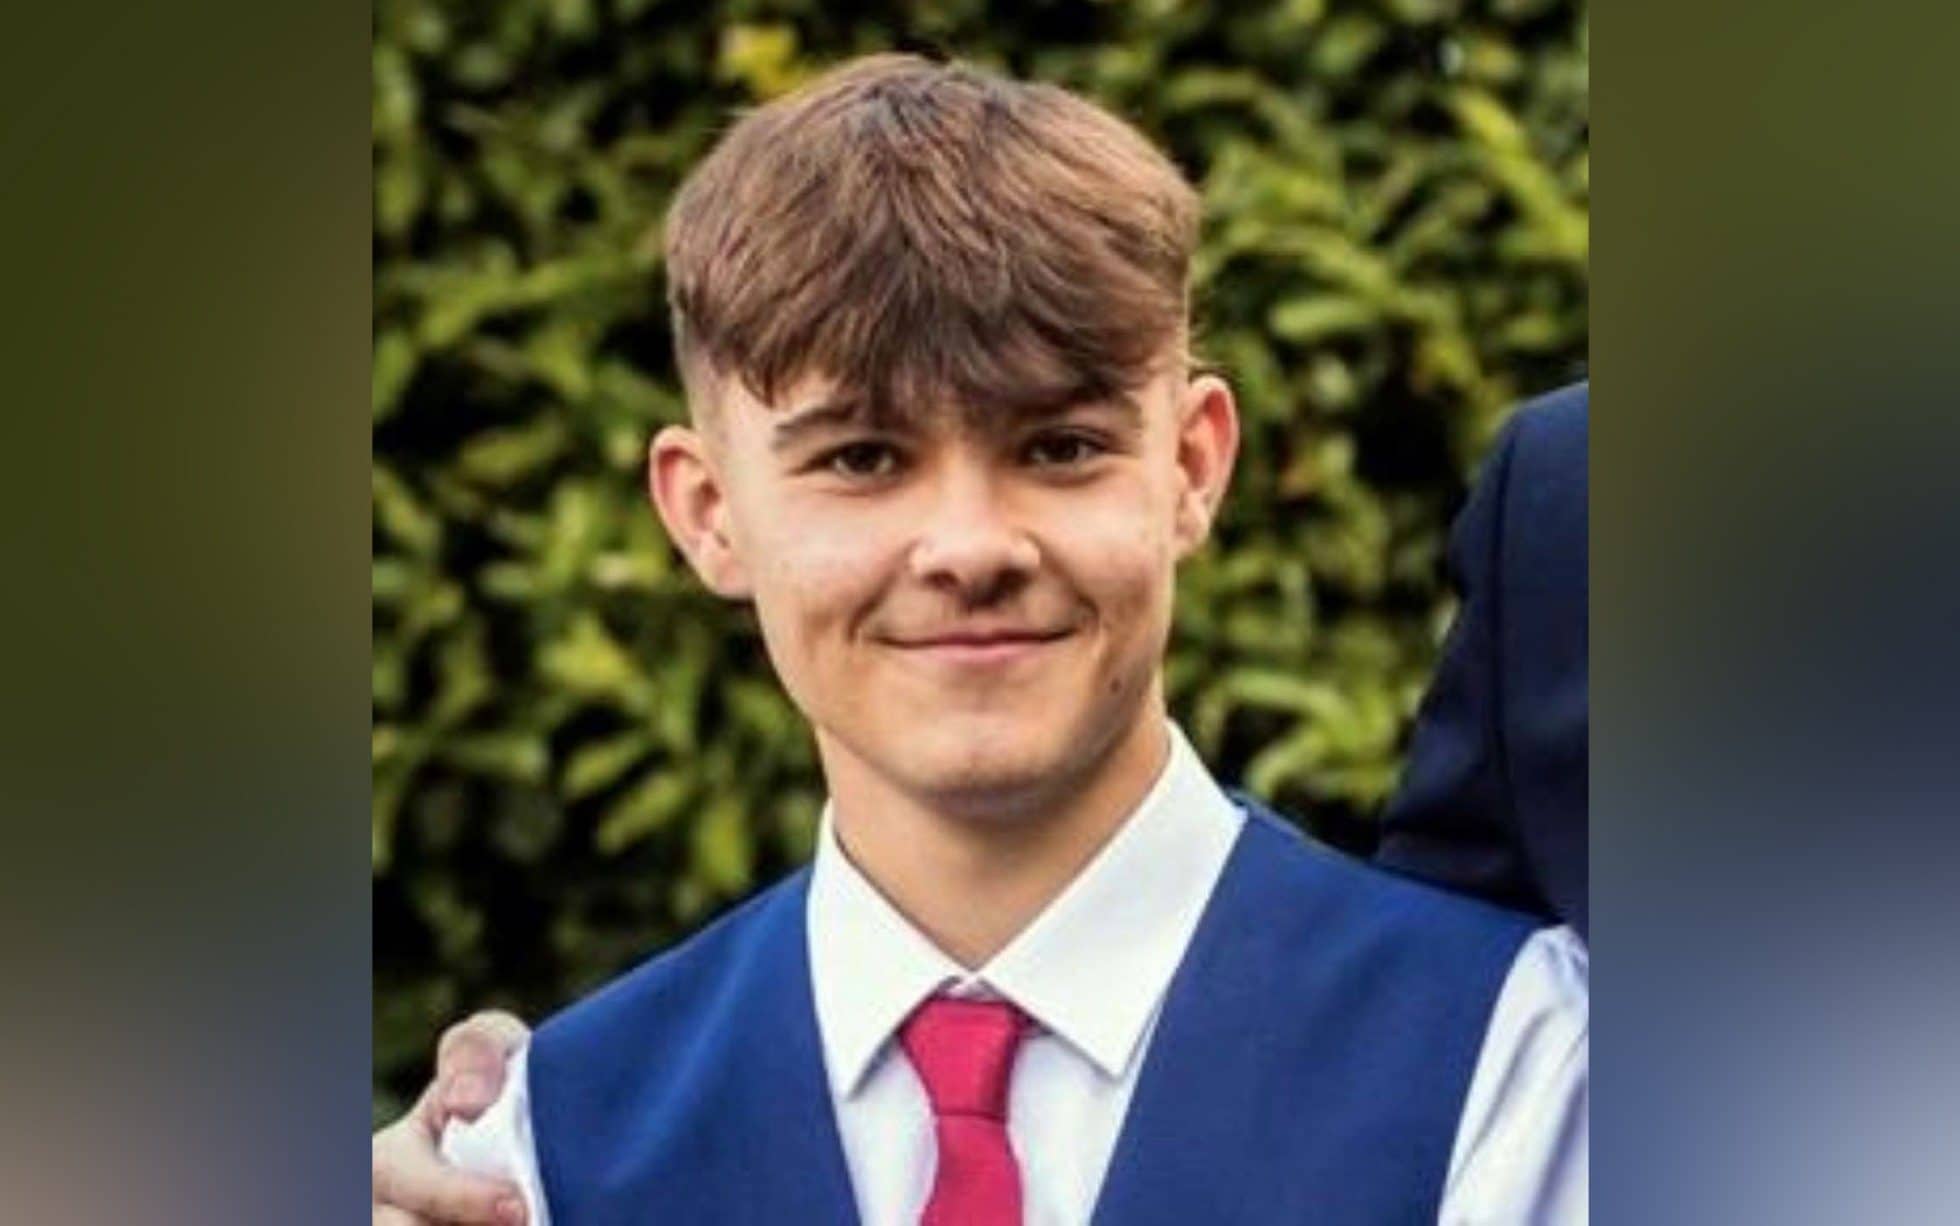 Knife crime can happen to anyone, says father of teenager killed at £1.5m farmhouse party